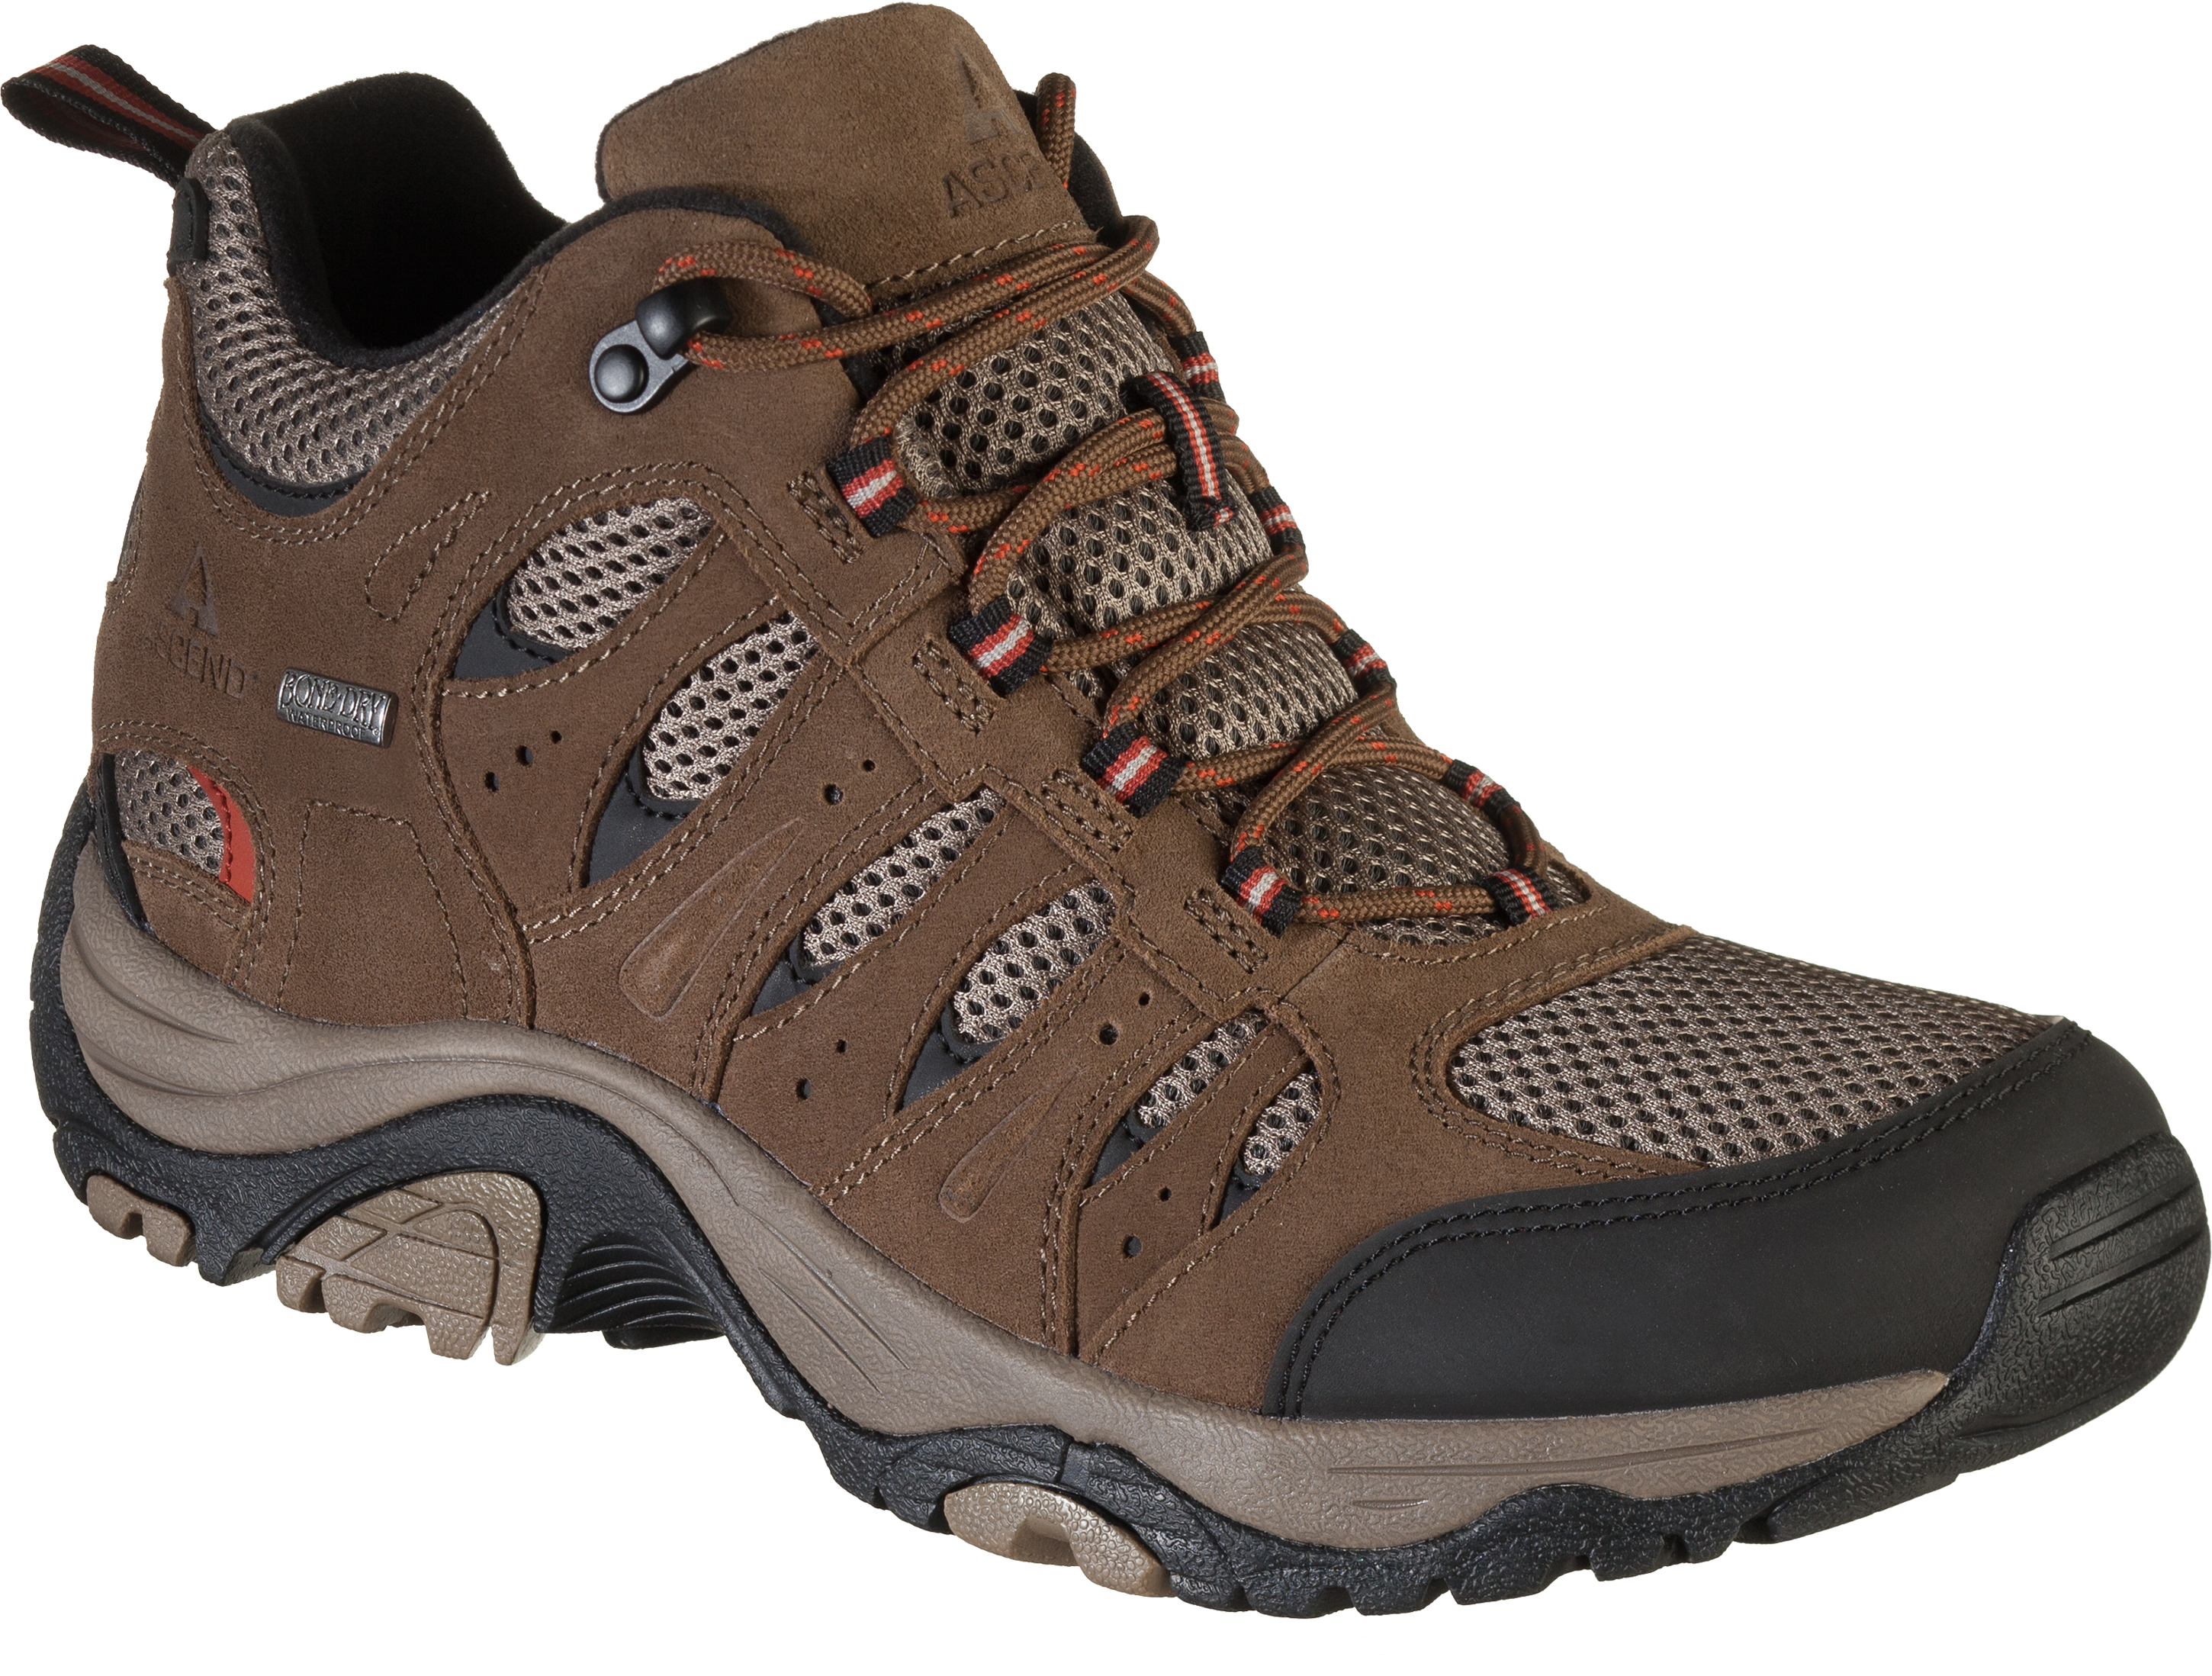 Ascend Lisco Mid Waterproof Hiking Boots for Men - Chocolate - 12M